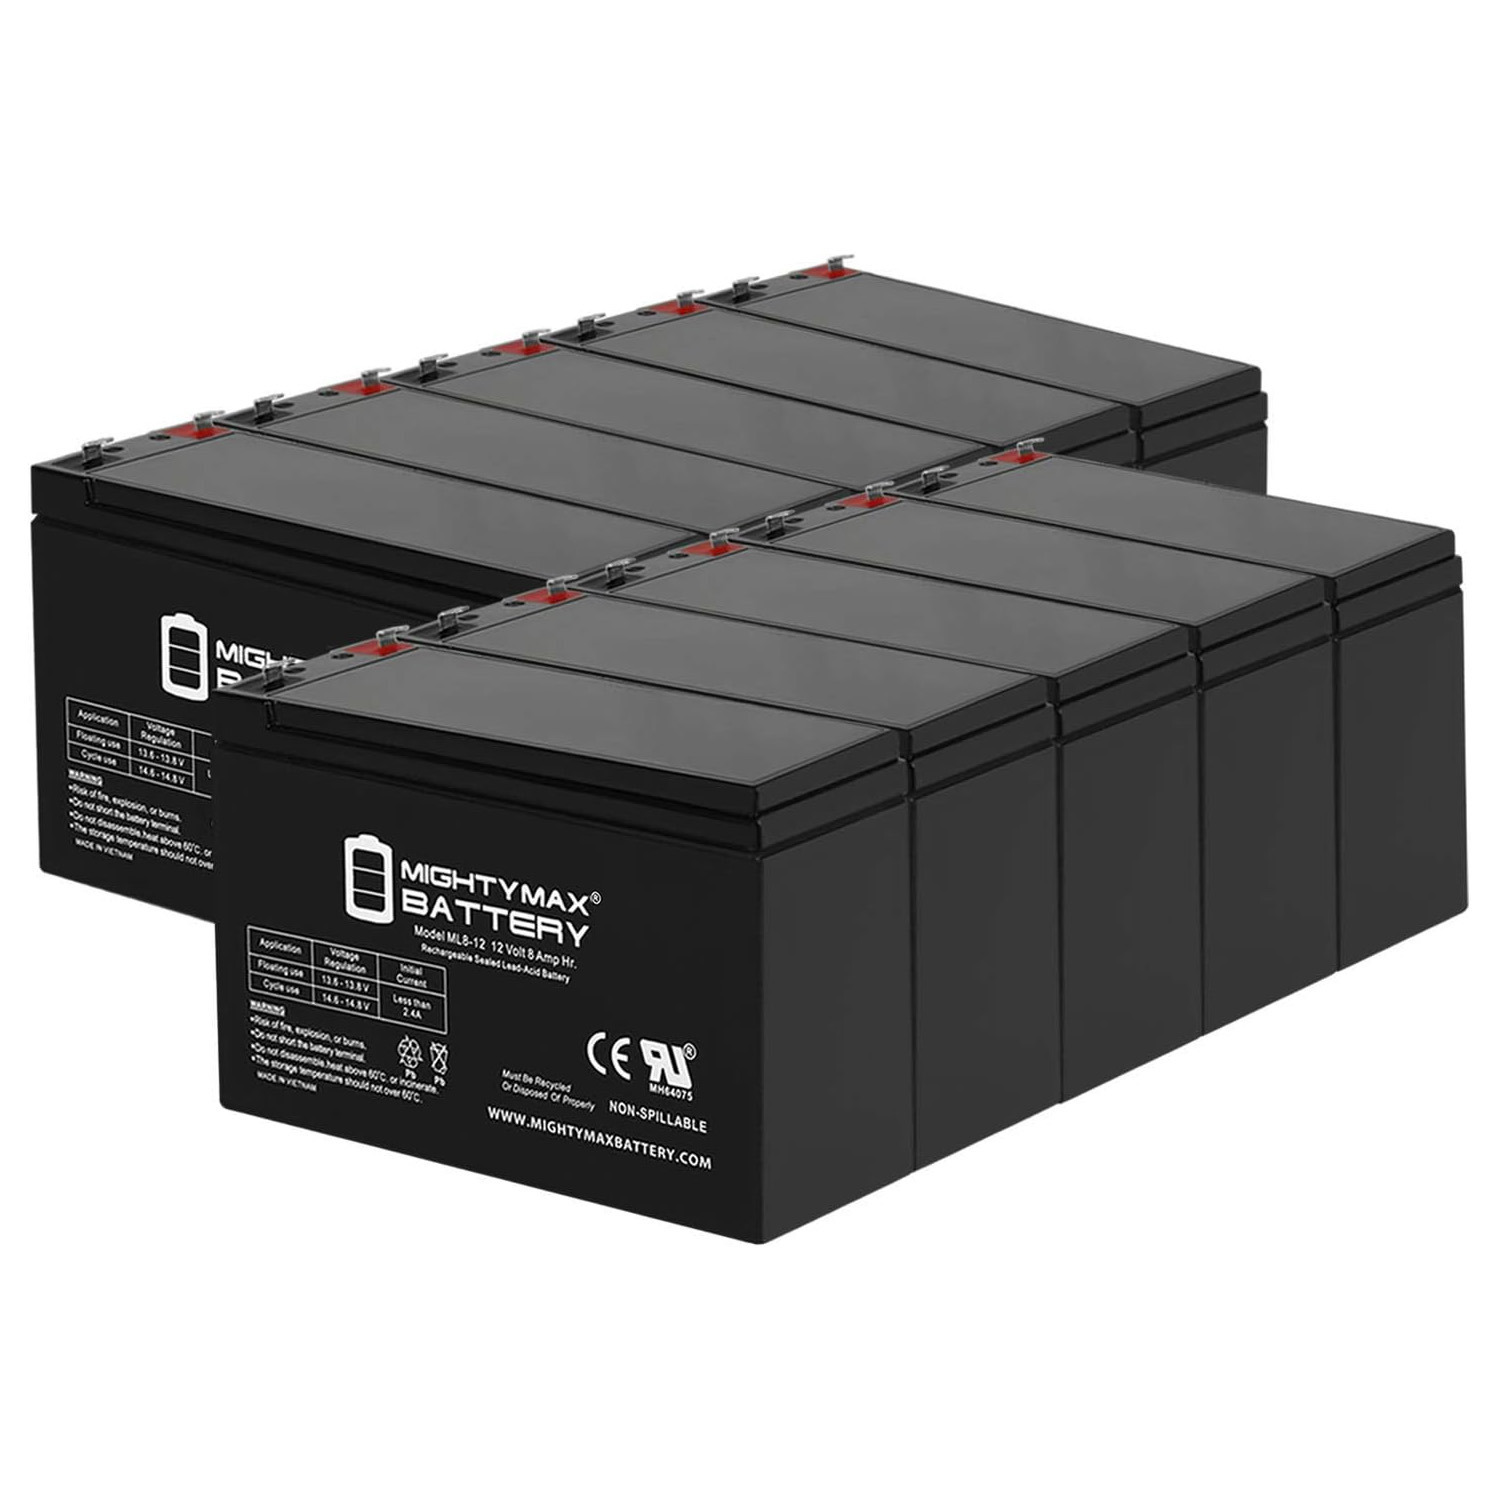 12V 8Ah Battery Replacement for Powerware 9150 One EBC-48 - 10 Pack